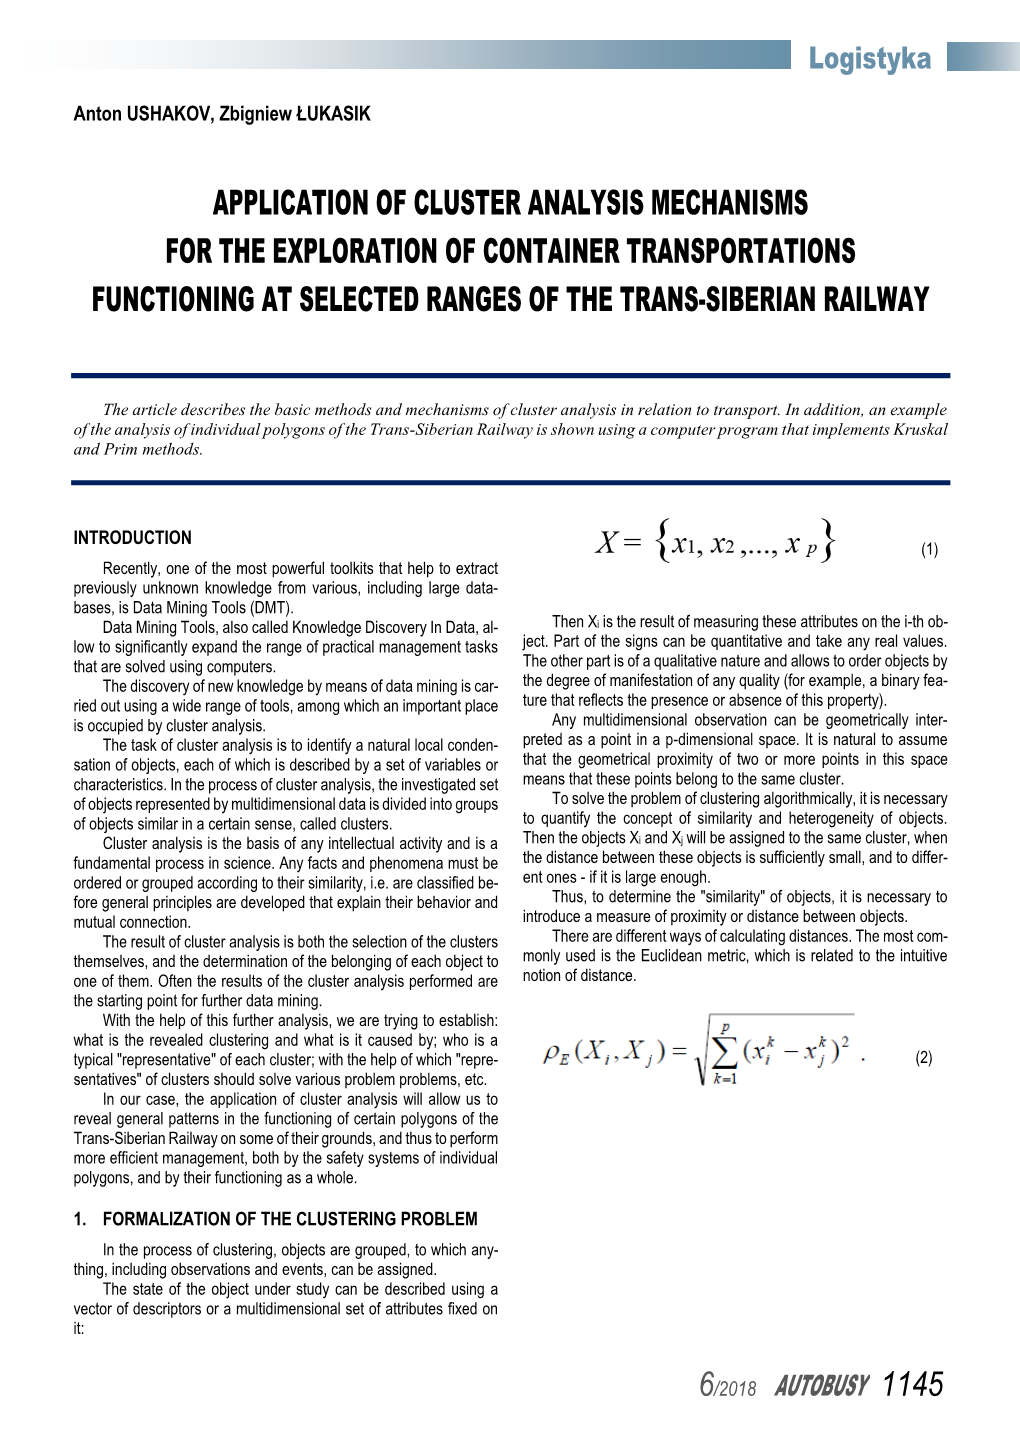 Application of Cluster Analysis Mechanisms for the Exploration of Container Transportations